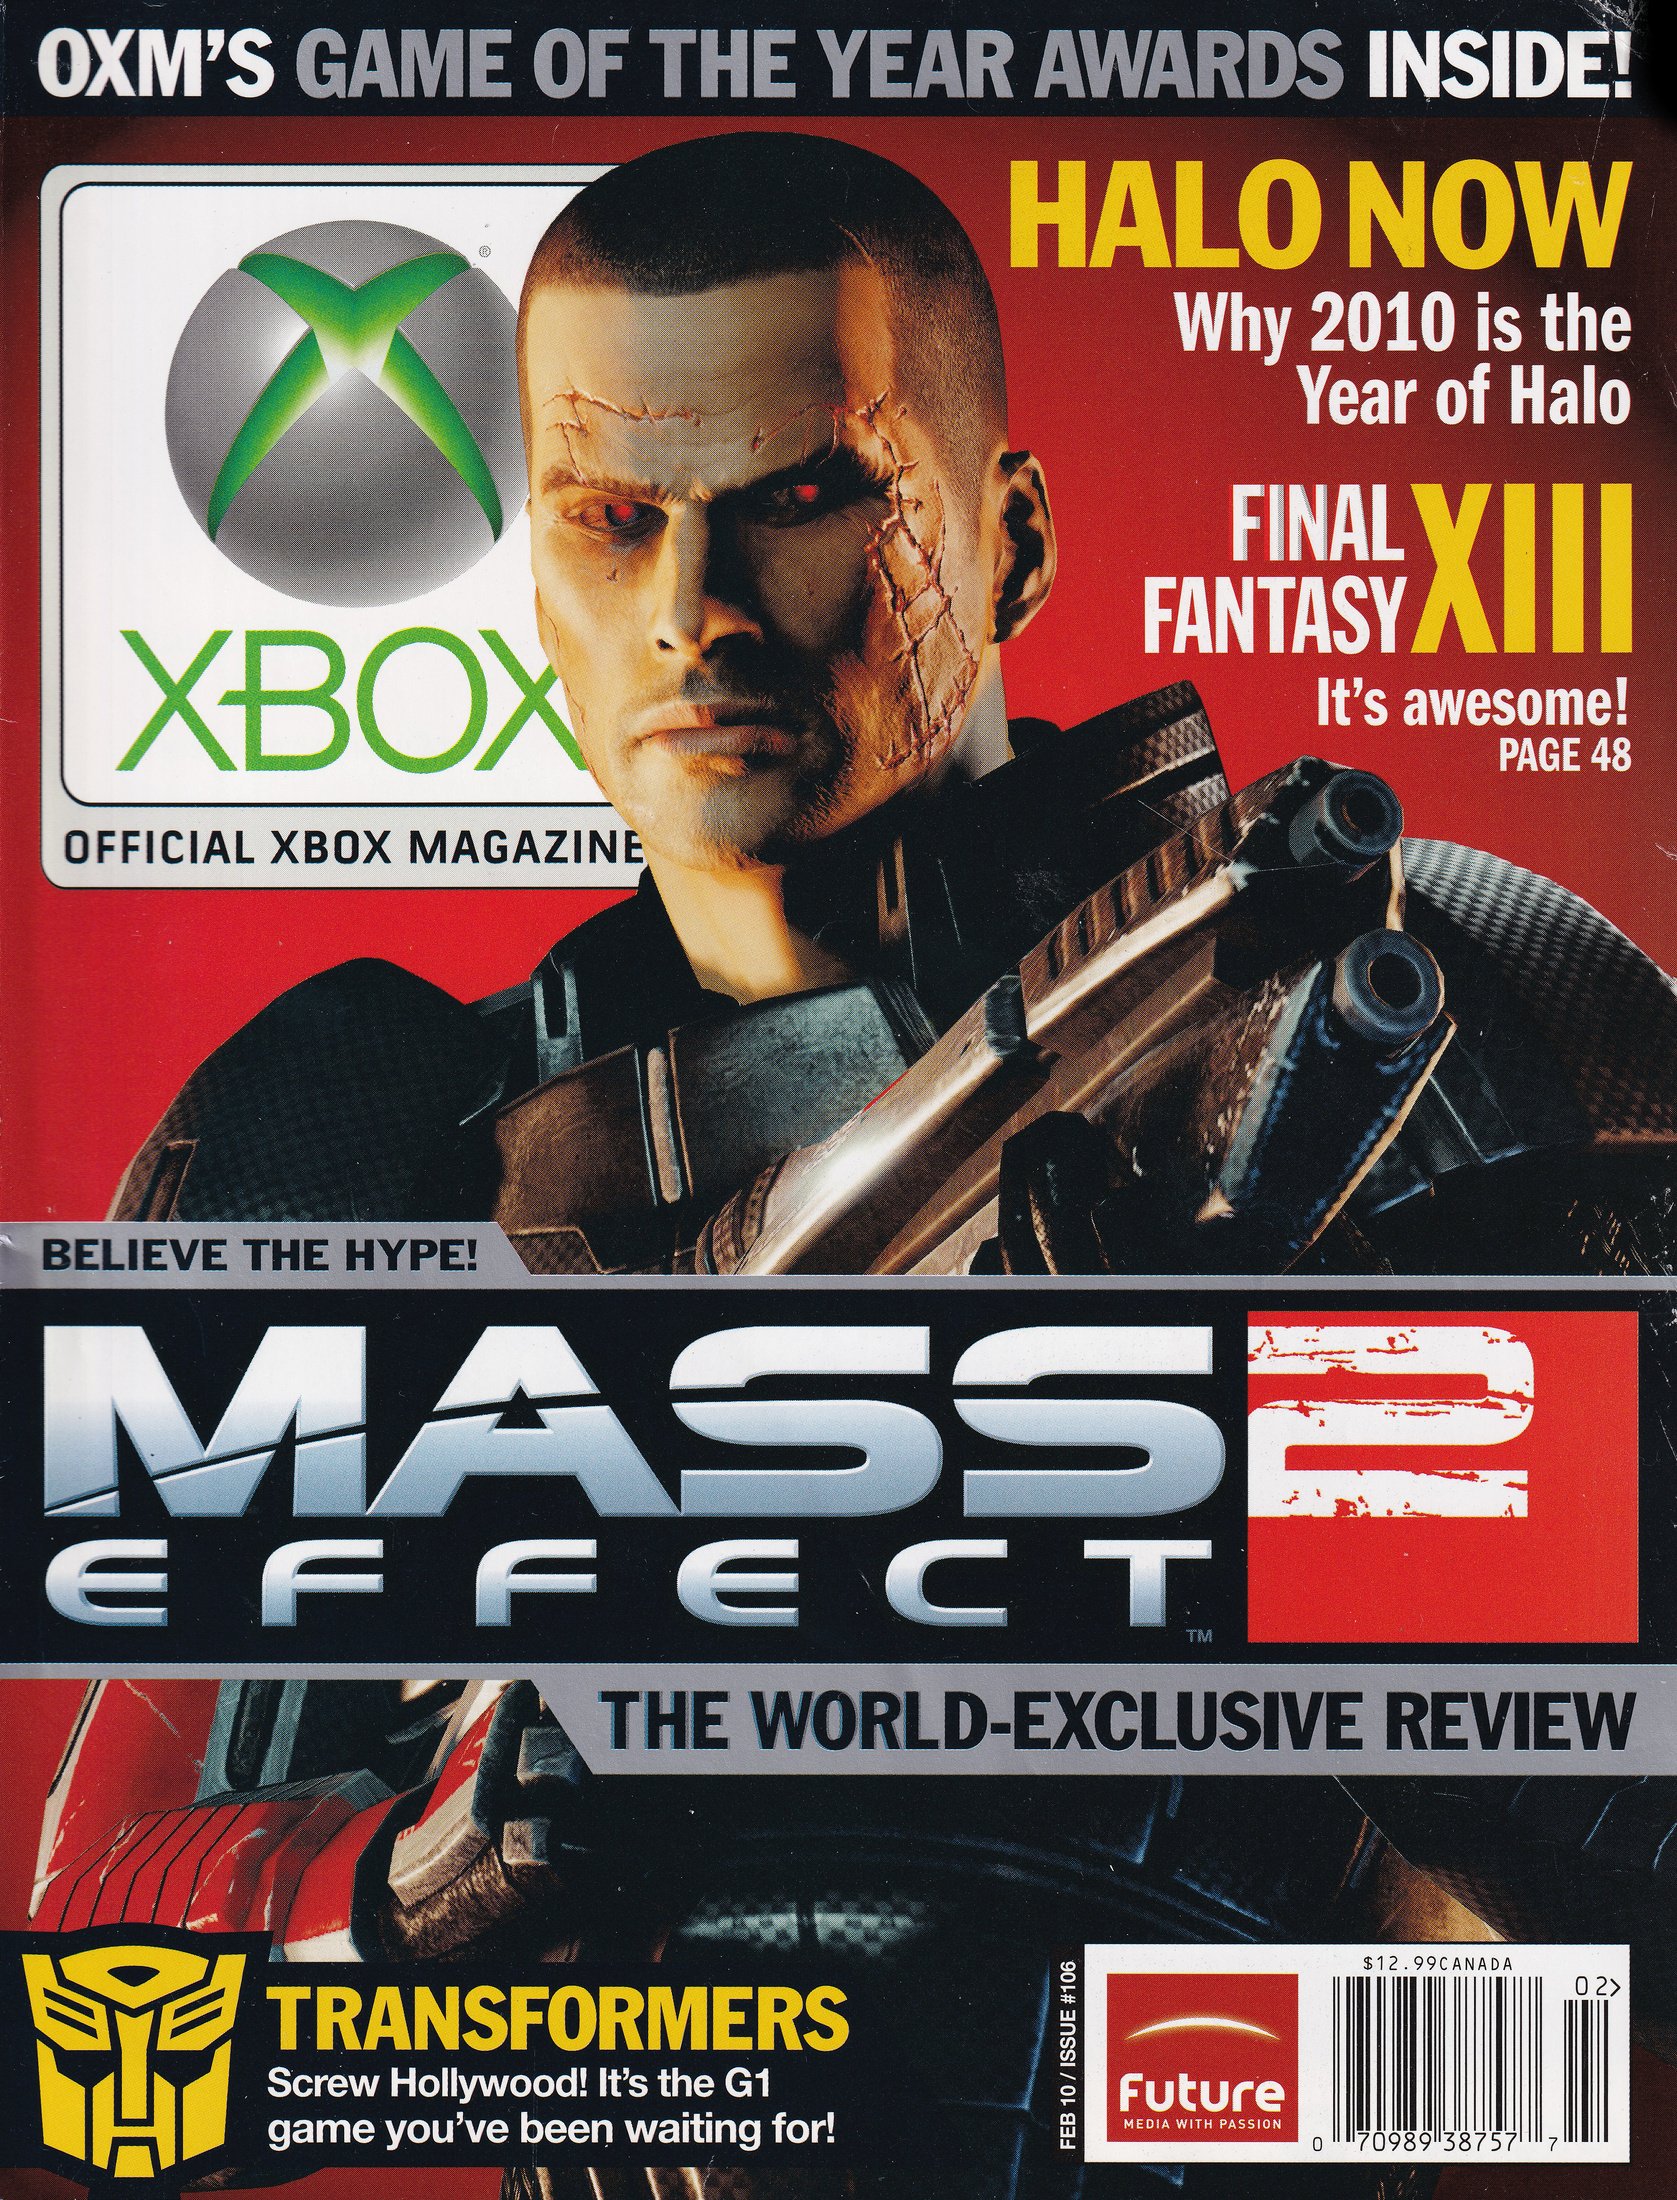 Official XBOX Magazine Issue 106 (February 2010)